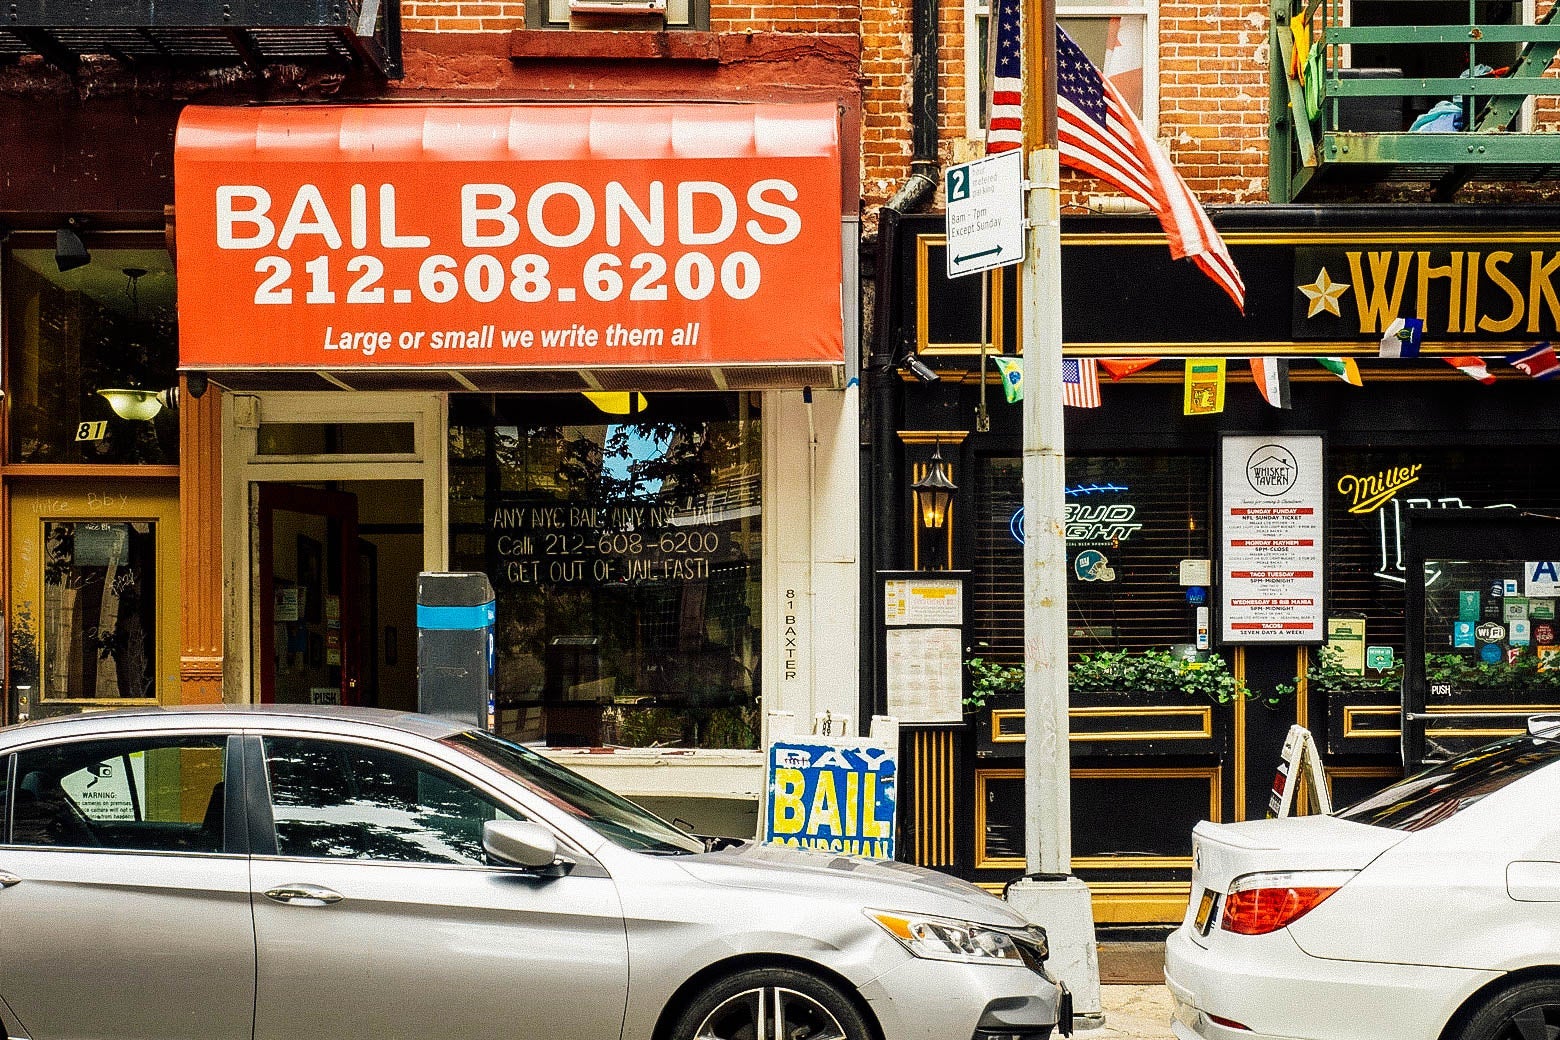 The storefront of a bail bonds shop with cars parked on the street in front of it in New York City.